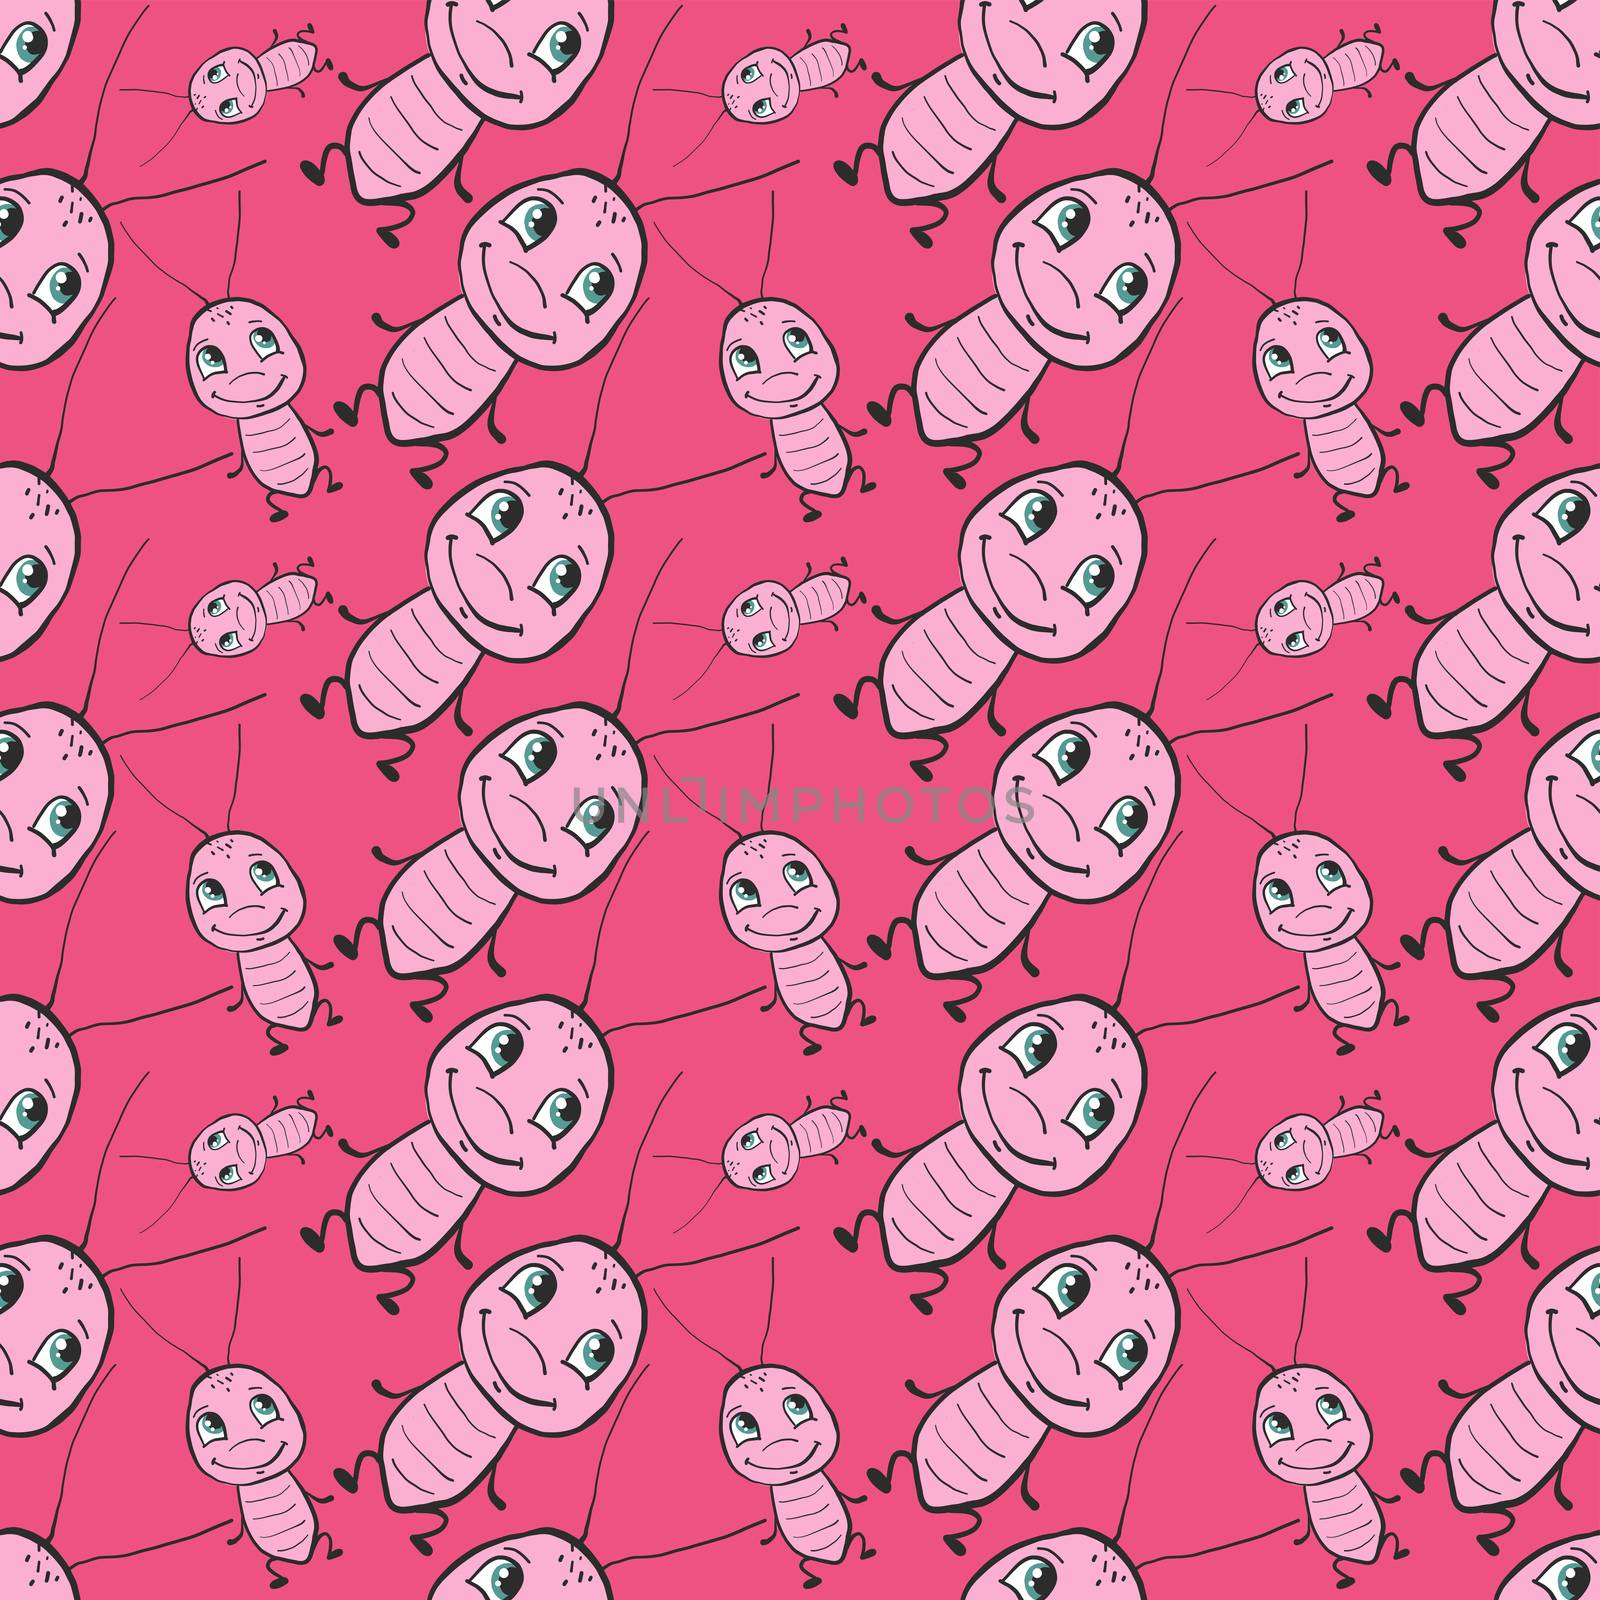 Cockroach pattern , illustration, vector on white background by Morphart